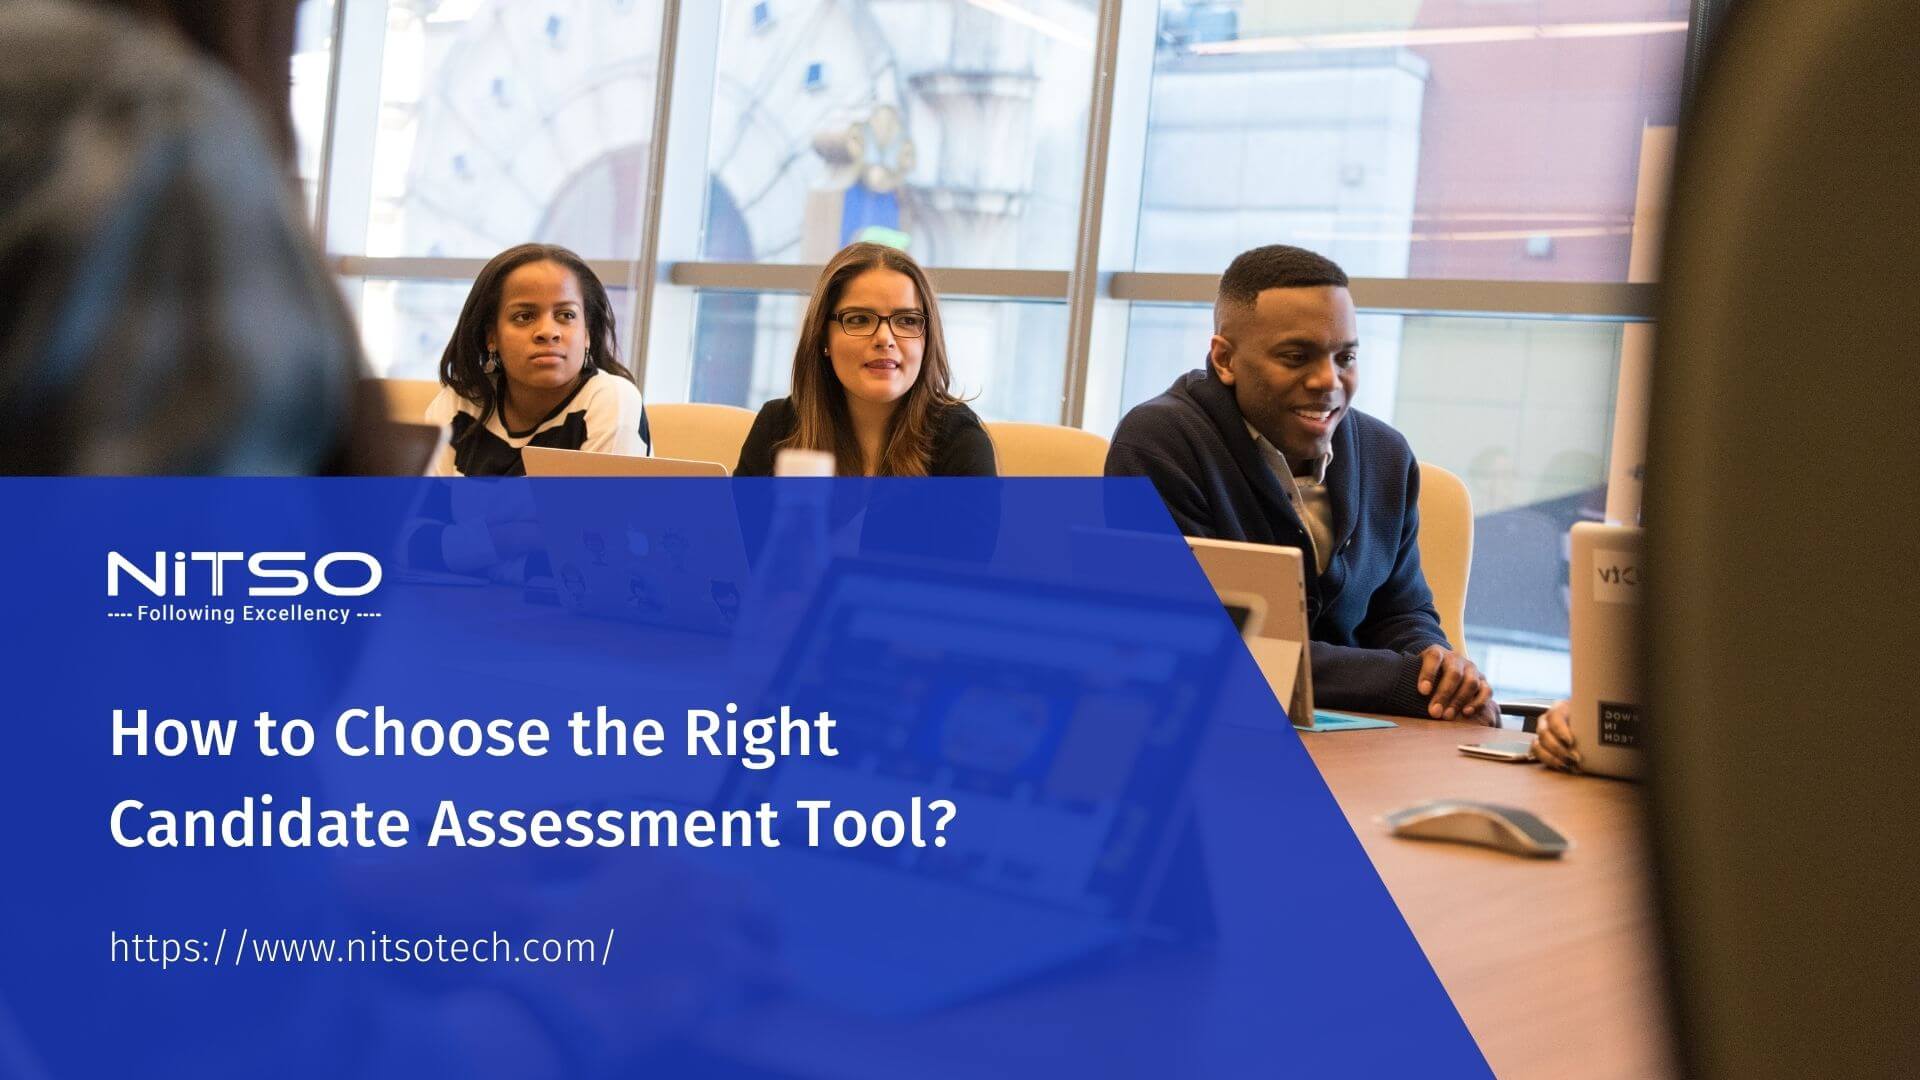 What’s the Best Candidate Assessment Tool for Your Needs?